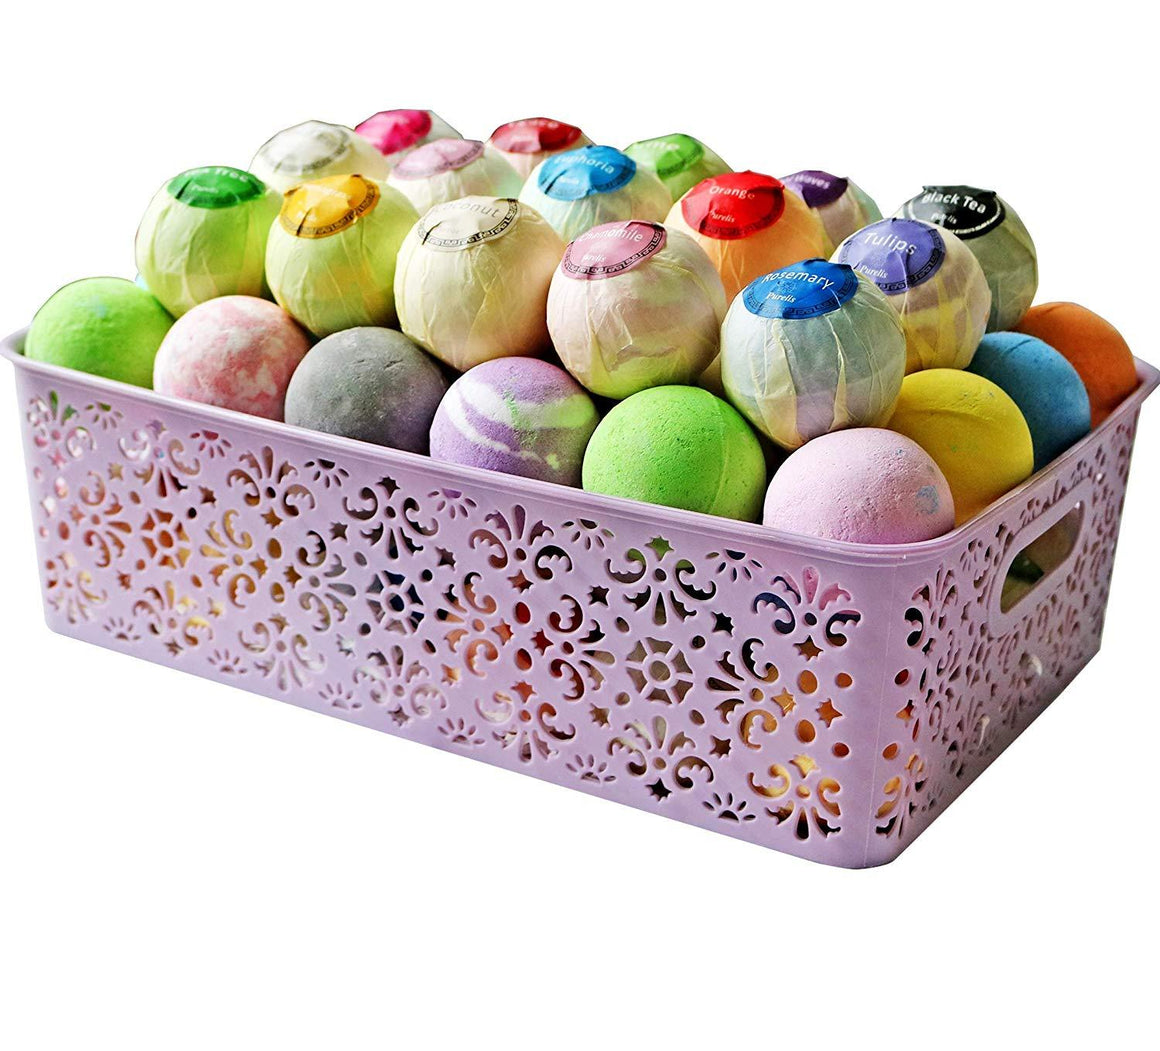 Bath Bombs Gift Baskets for Women! Basket of 40 Moisturizing Spa Fizzers Lush Bombs, 40 Unique Organic Bath Bombs Set. Luxury Spa Basket to store in. Gift Idea for Wife, Mom, Girl Friend, Party Favors - ardenorganics.com